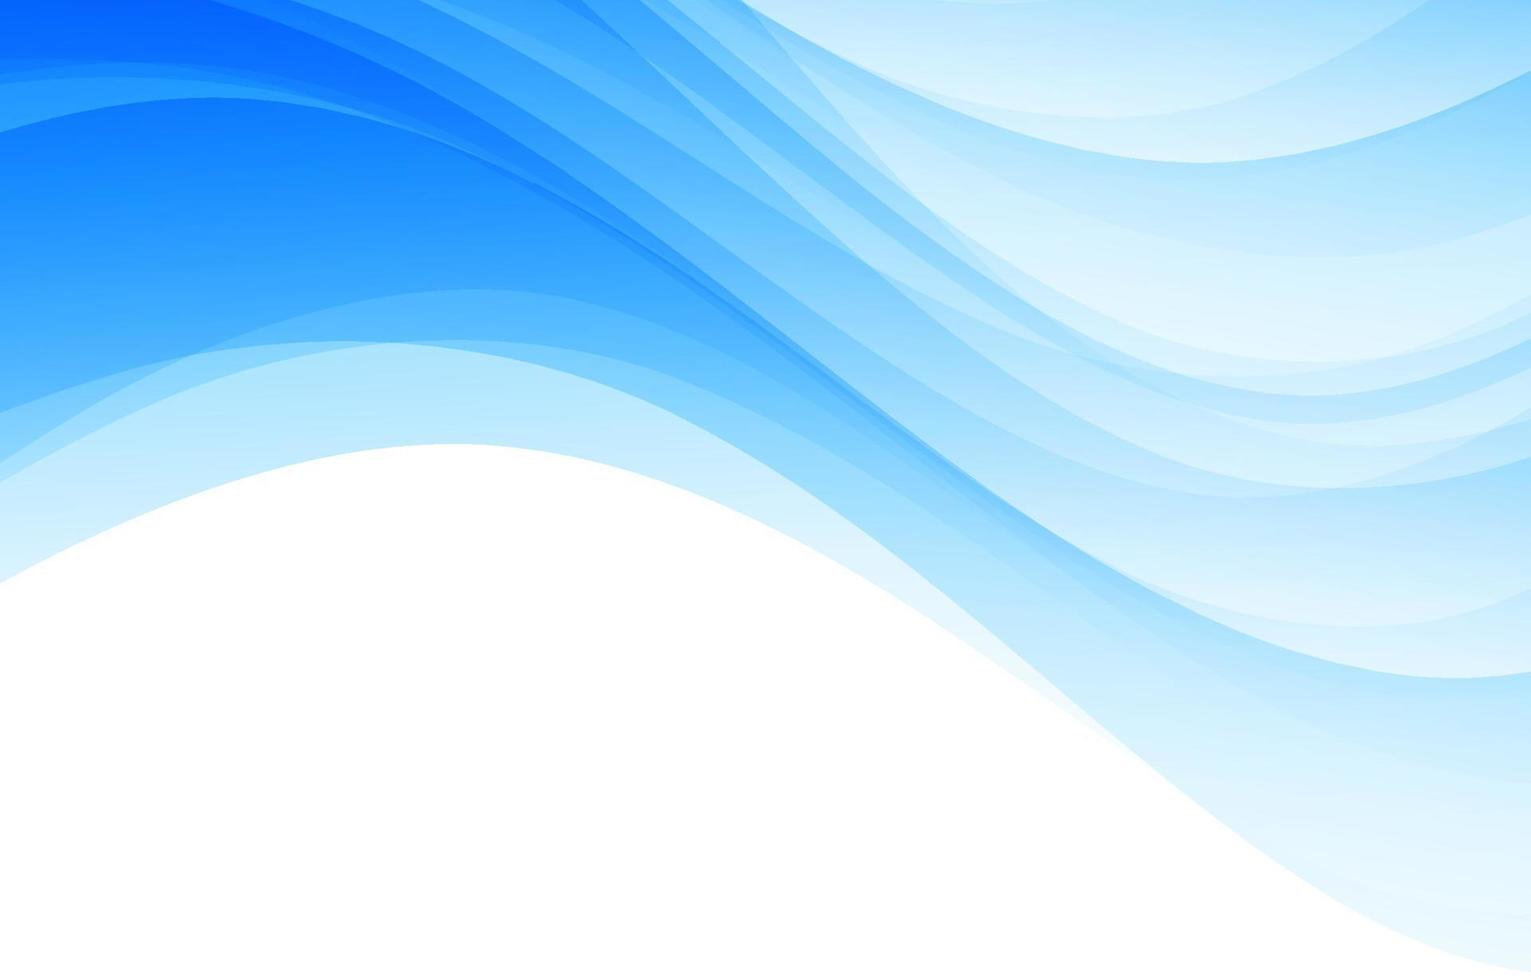 abstract blue wavy background template vector